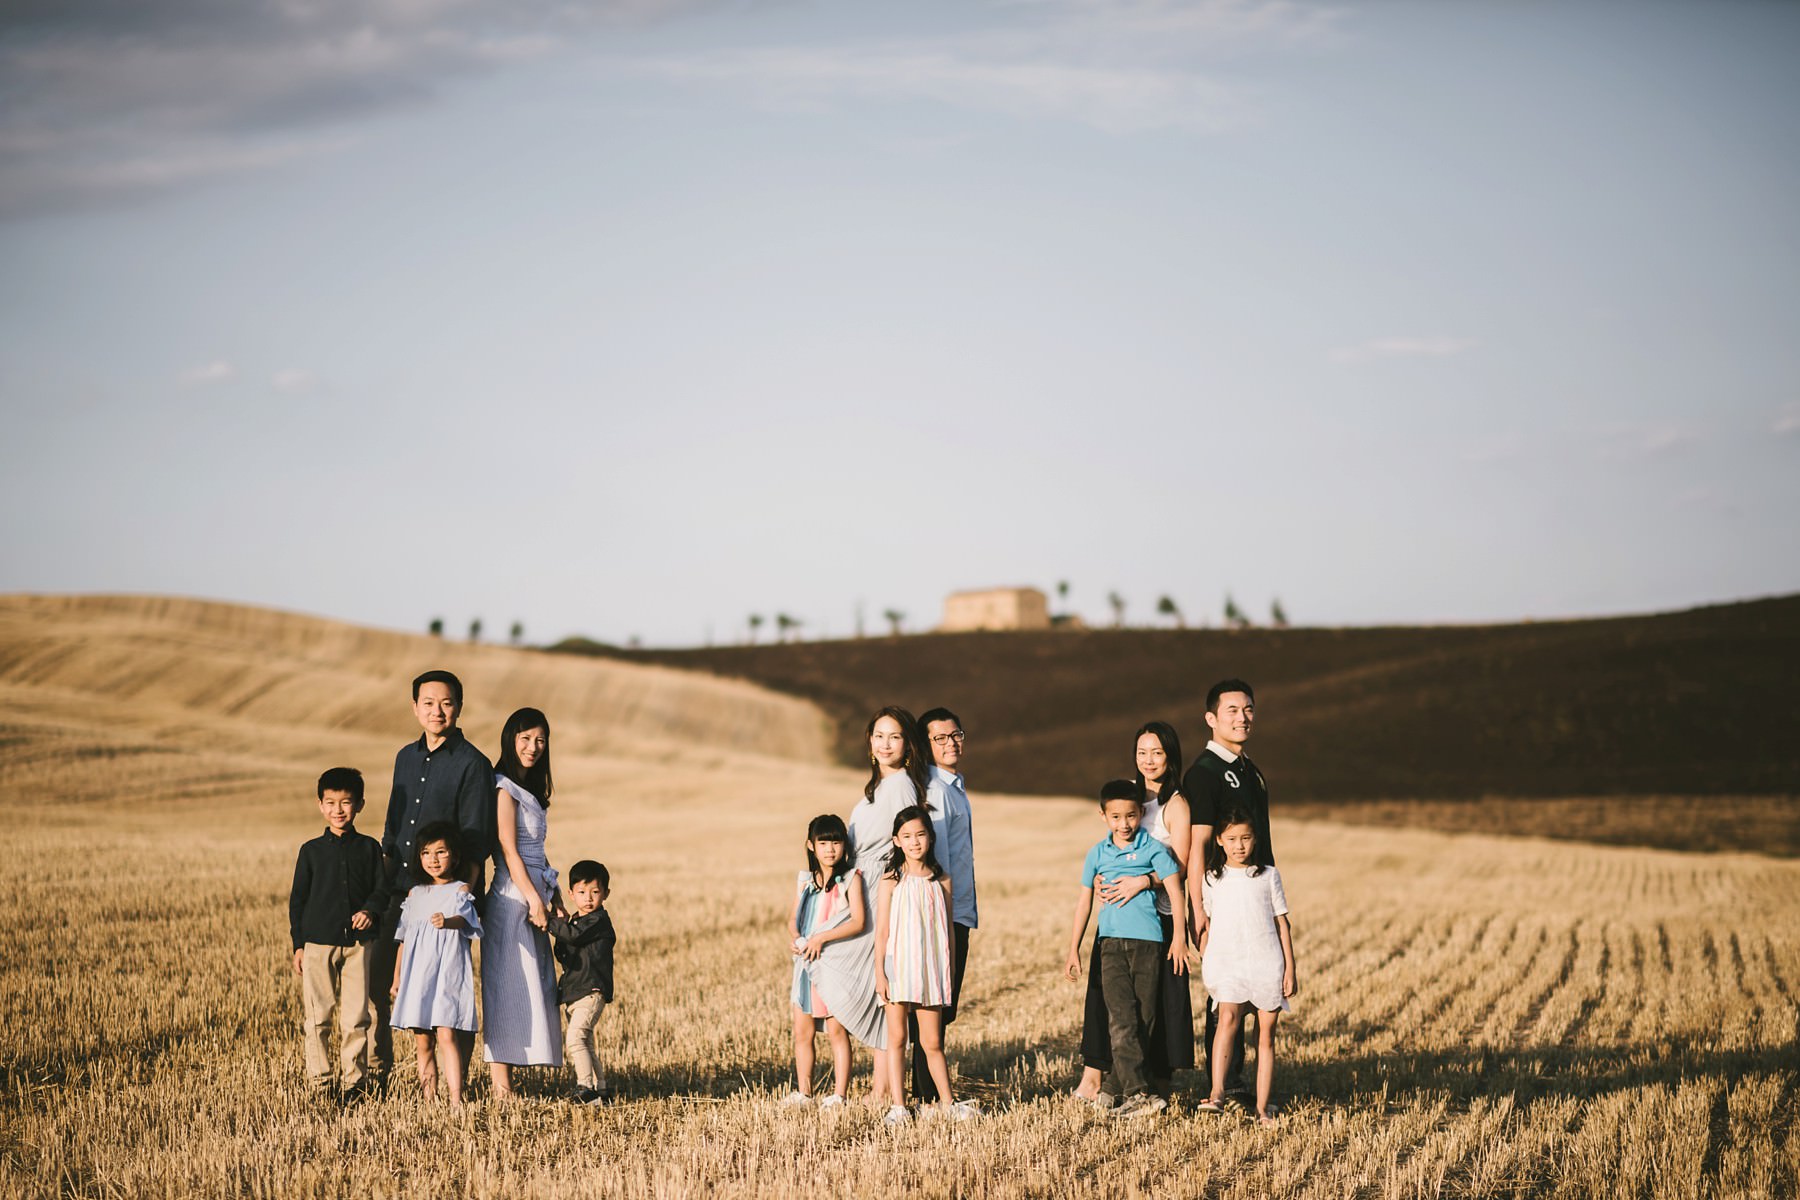 Are you looking for a special gift for your family and you? A family photoshoot is just what you needÉ get inspired by this cute family reunion session in Tuscany!